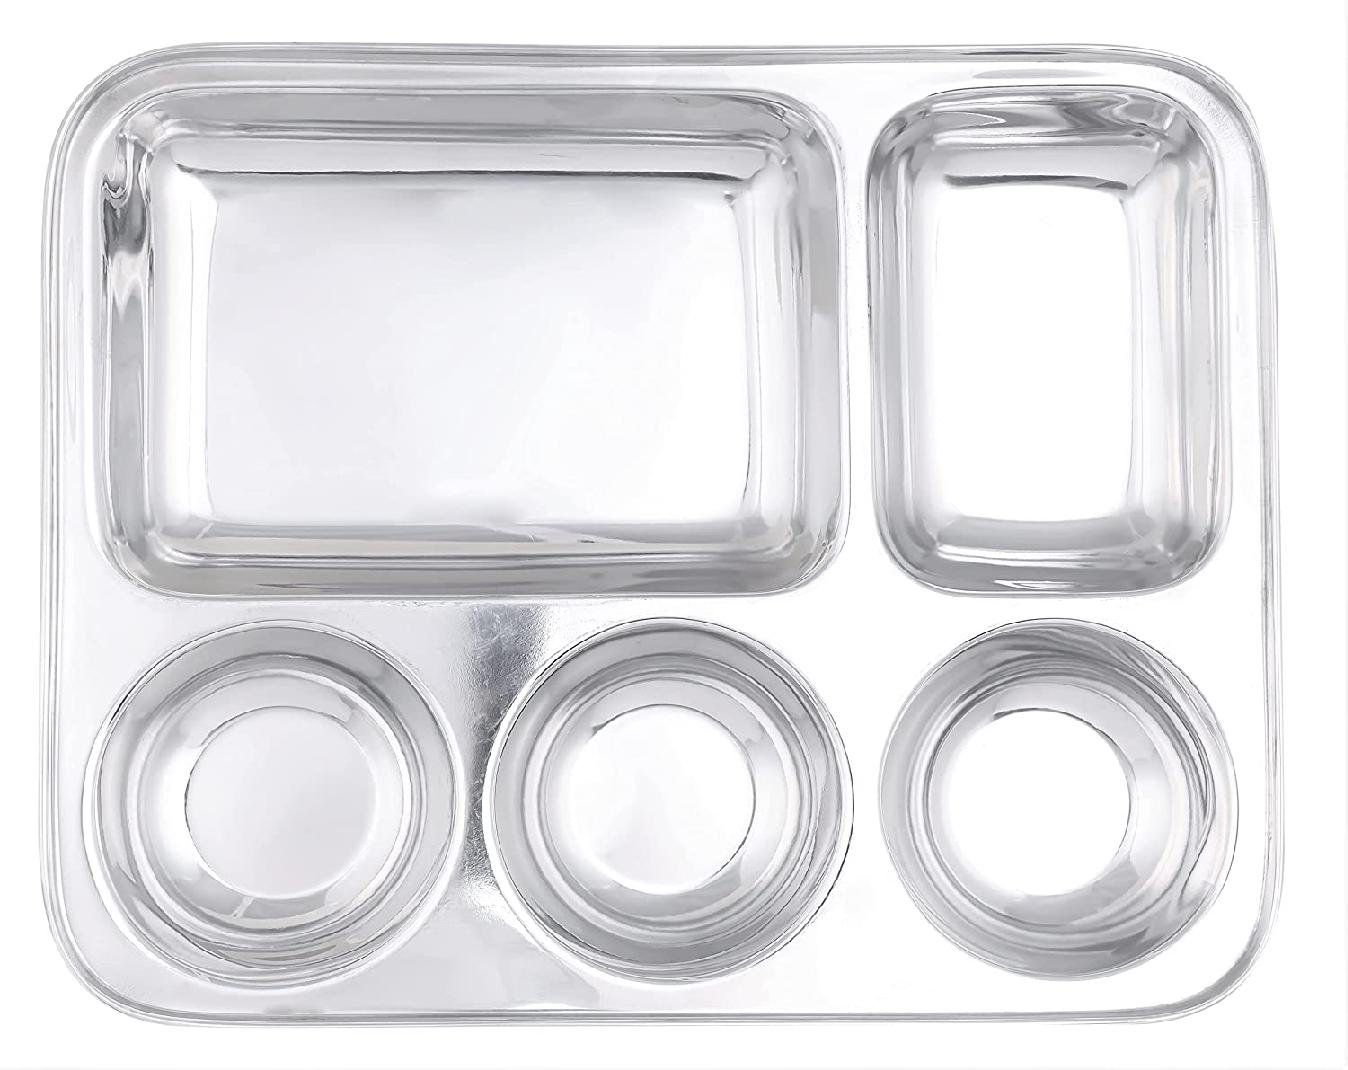 6 Pcs Stainless Steel  Round Compartment Tray/Thali/ Plate 4 or 5 compartments 